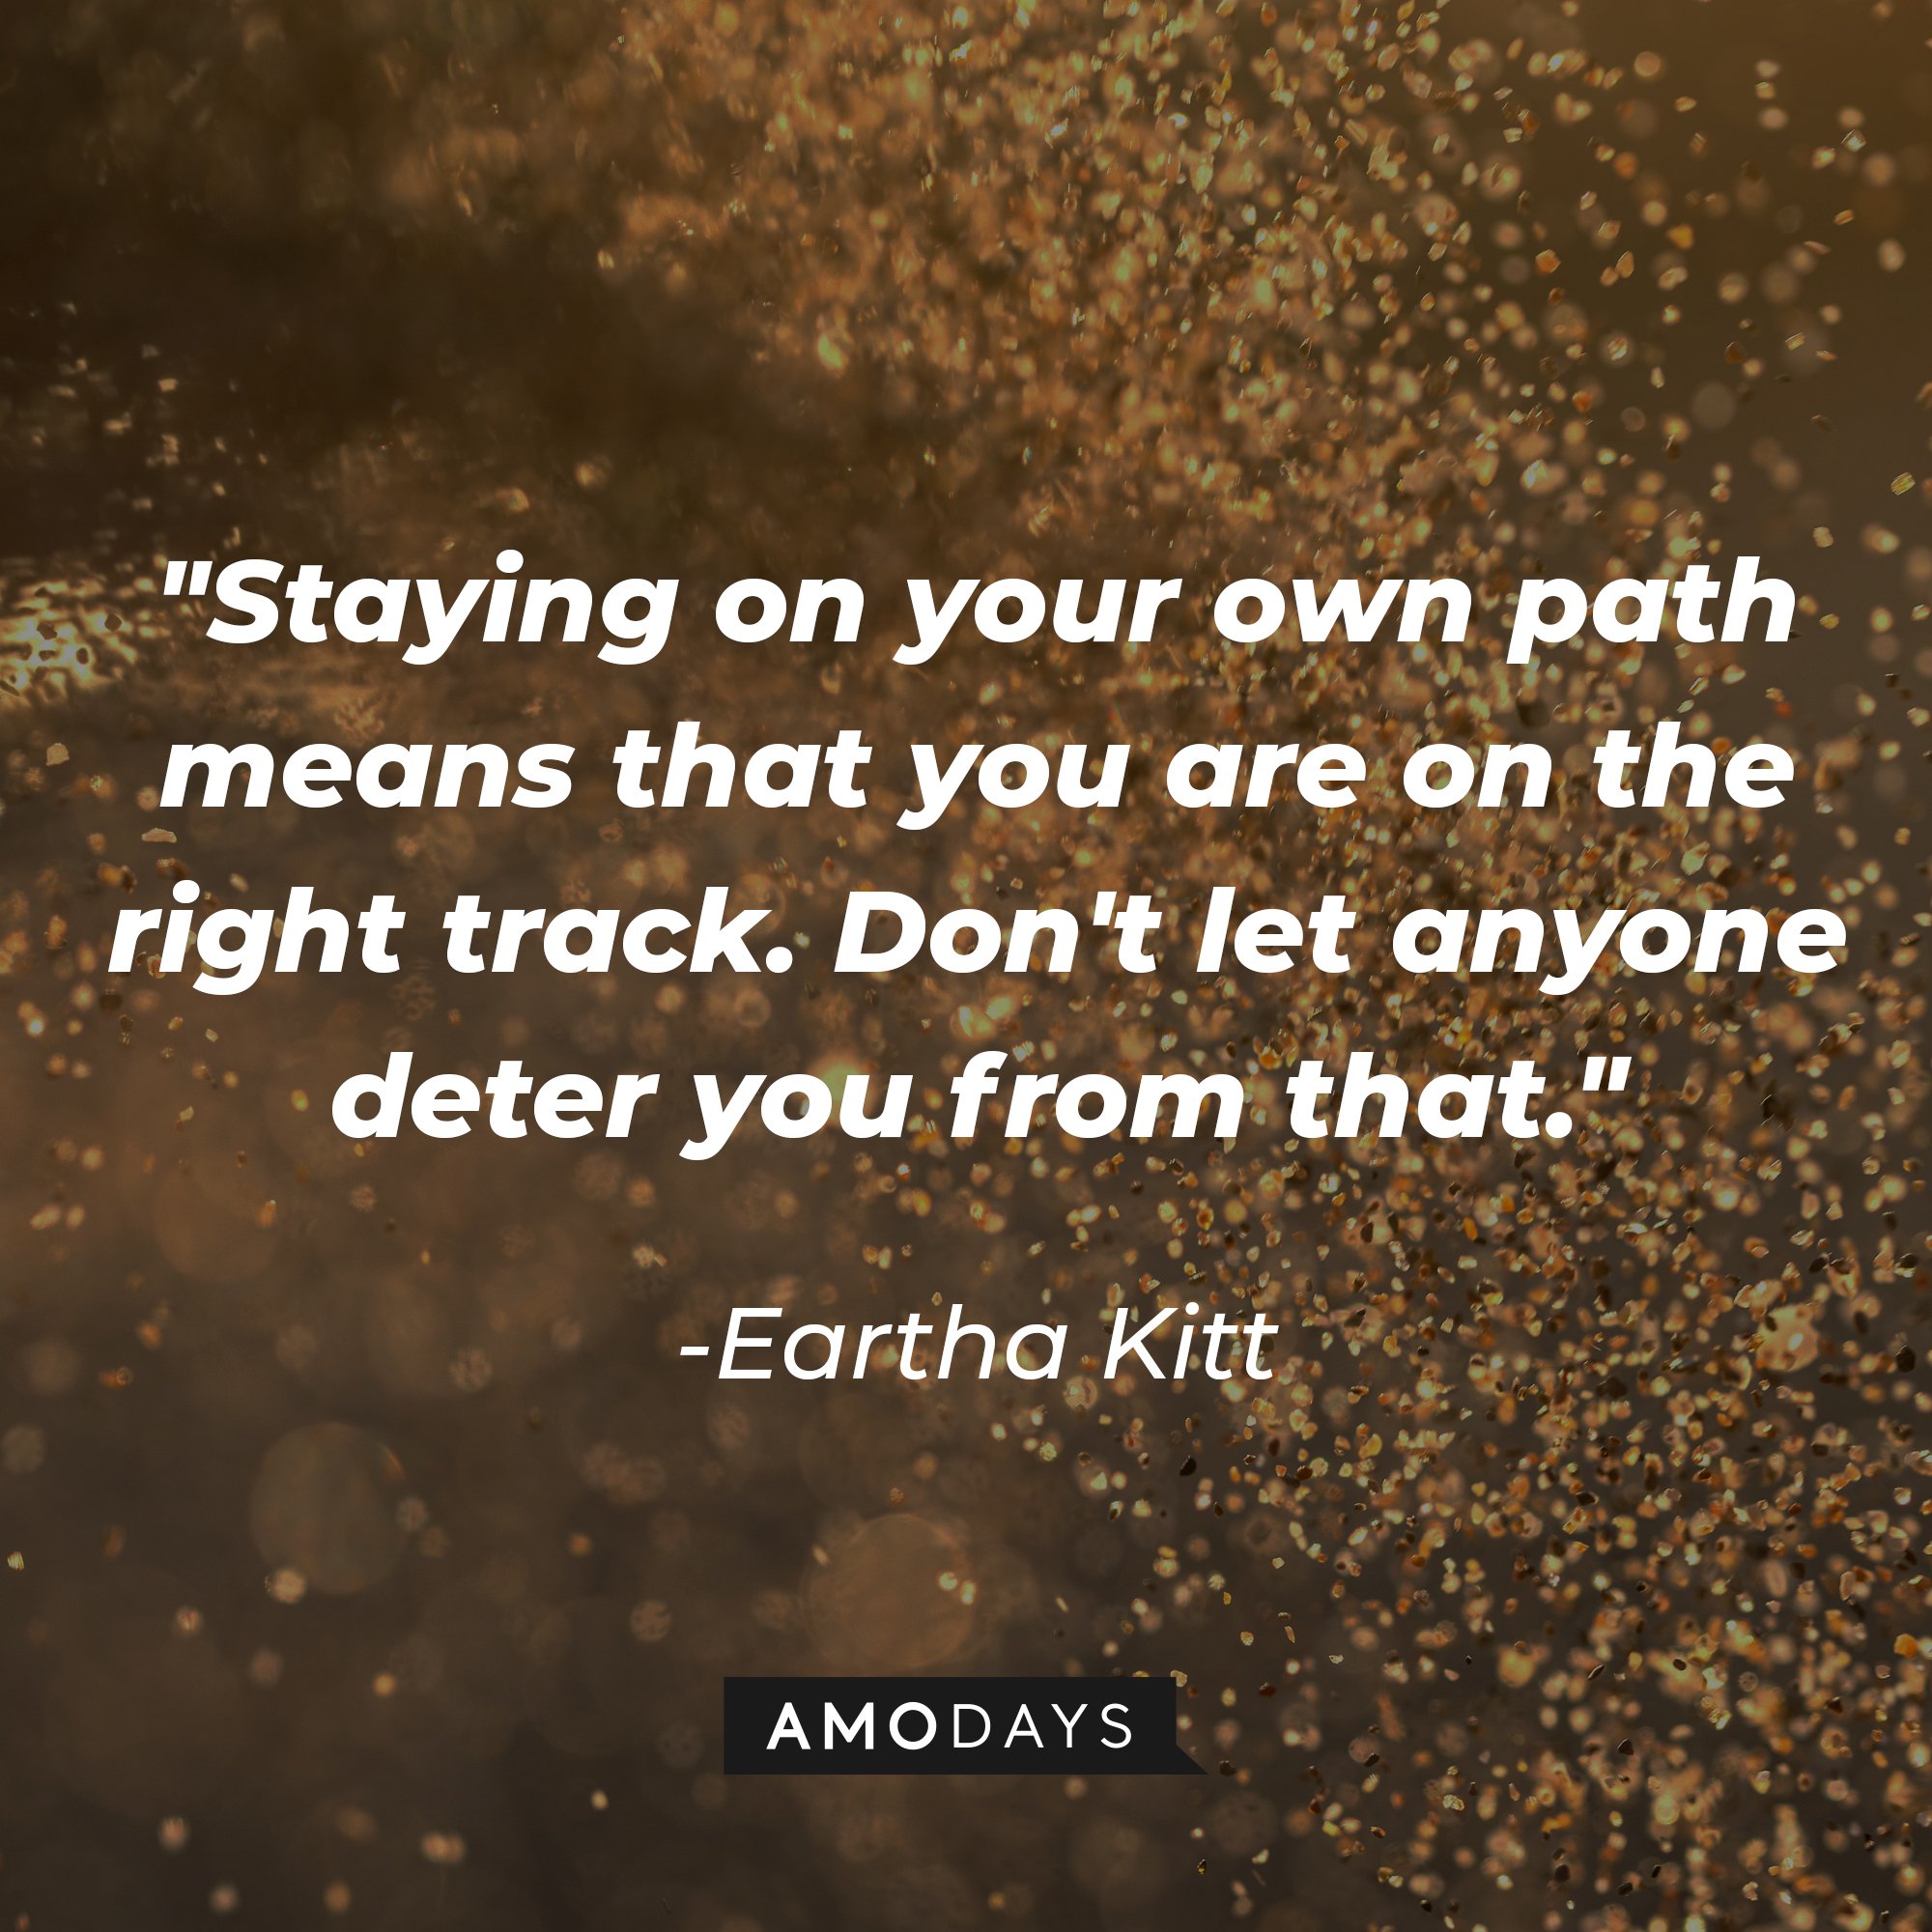 Eartha Kitt’s quote: "Staying on your own path means that you are on the right track. Don't let anyone deter you from that." | Image: AmoDays